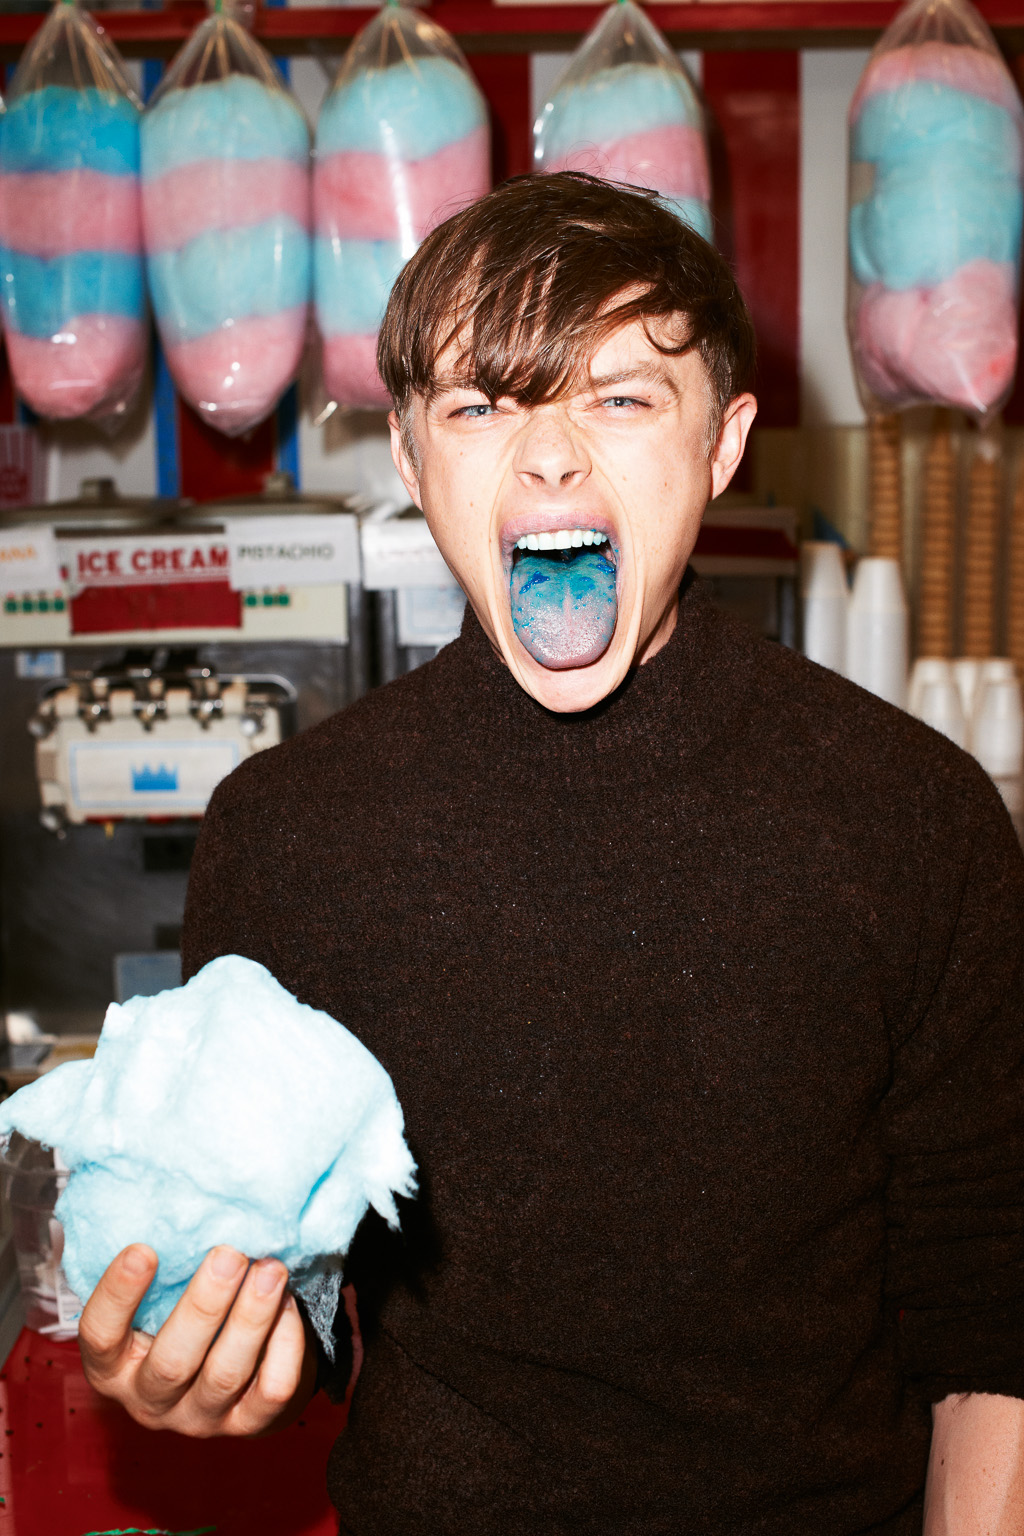 Dane Dehaan By Terry Richardson For Gq Style Uk The Fashionisto